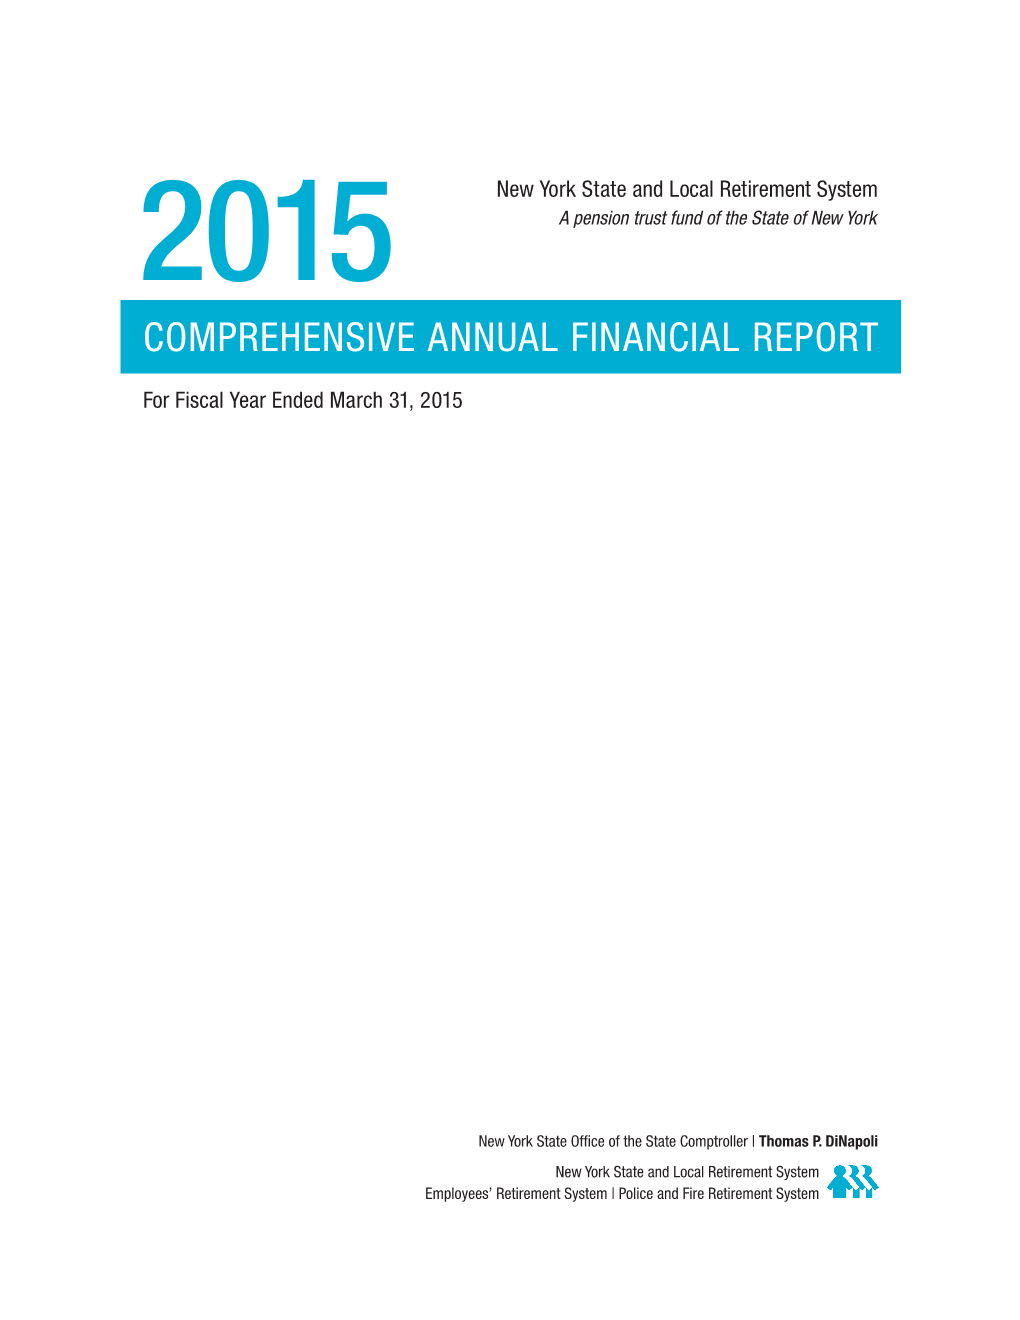 2015 Comprehensive Annual Financial Report for Fiscal Year Ended March 31, 2015